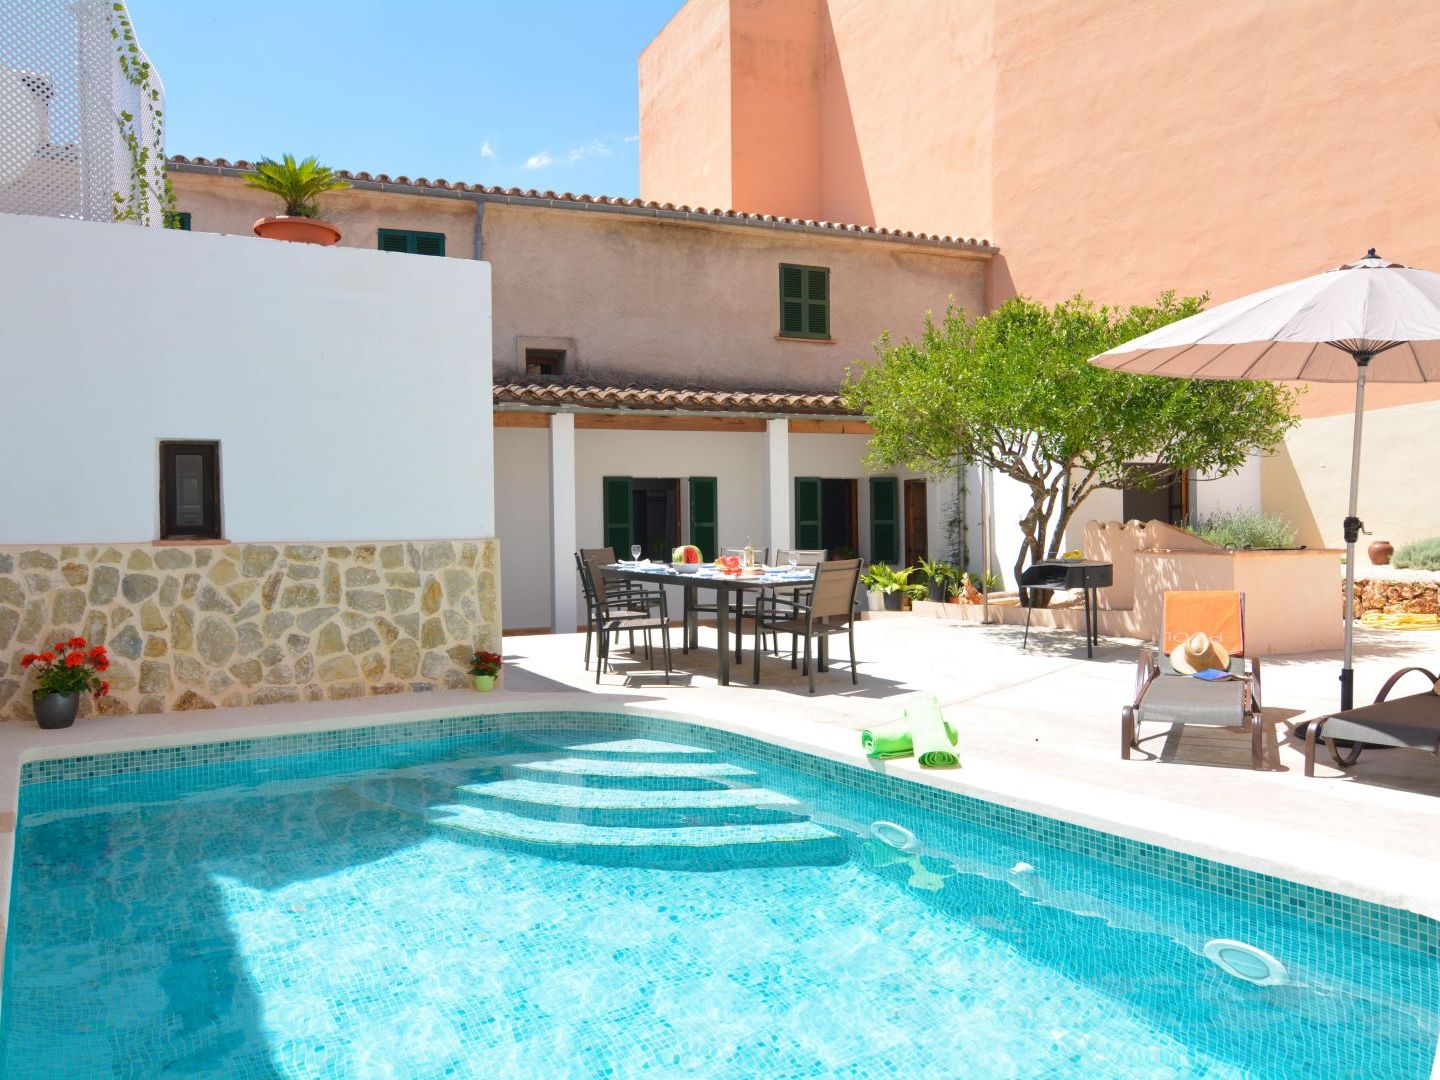 Fotos del hotel - MALLORCA TOWN HOUSE WITH POOL